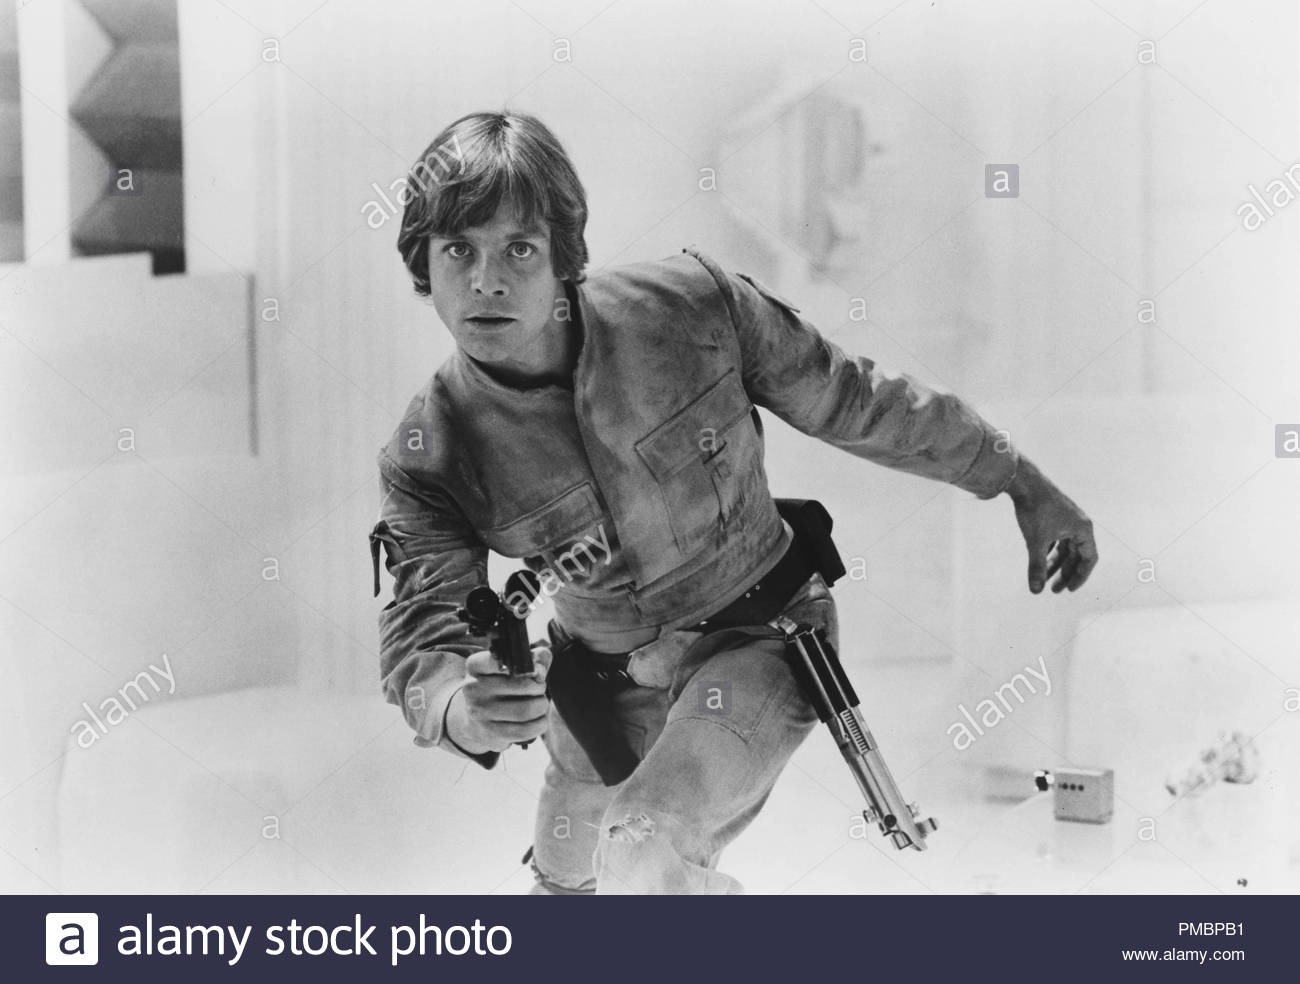 mark-hamill-in-star-wars-episode-v-the-empire-strikes-back-1980-file-reference-32603-379tha-P...jpeg